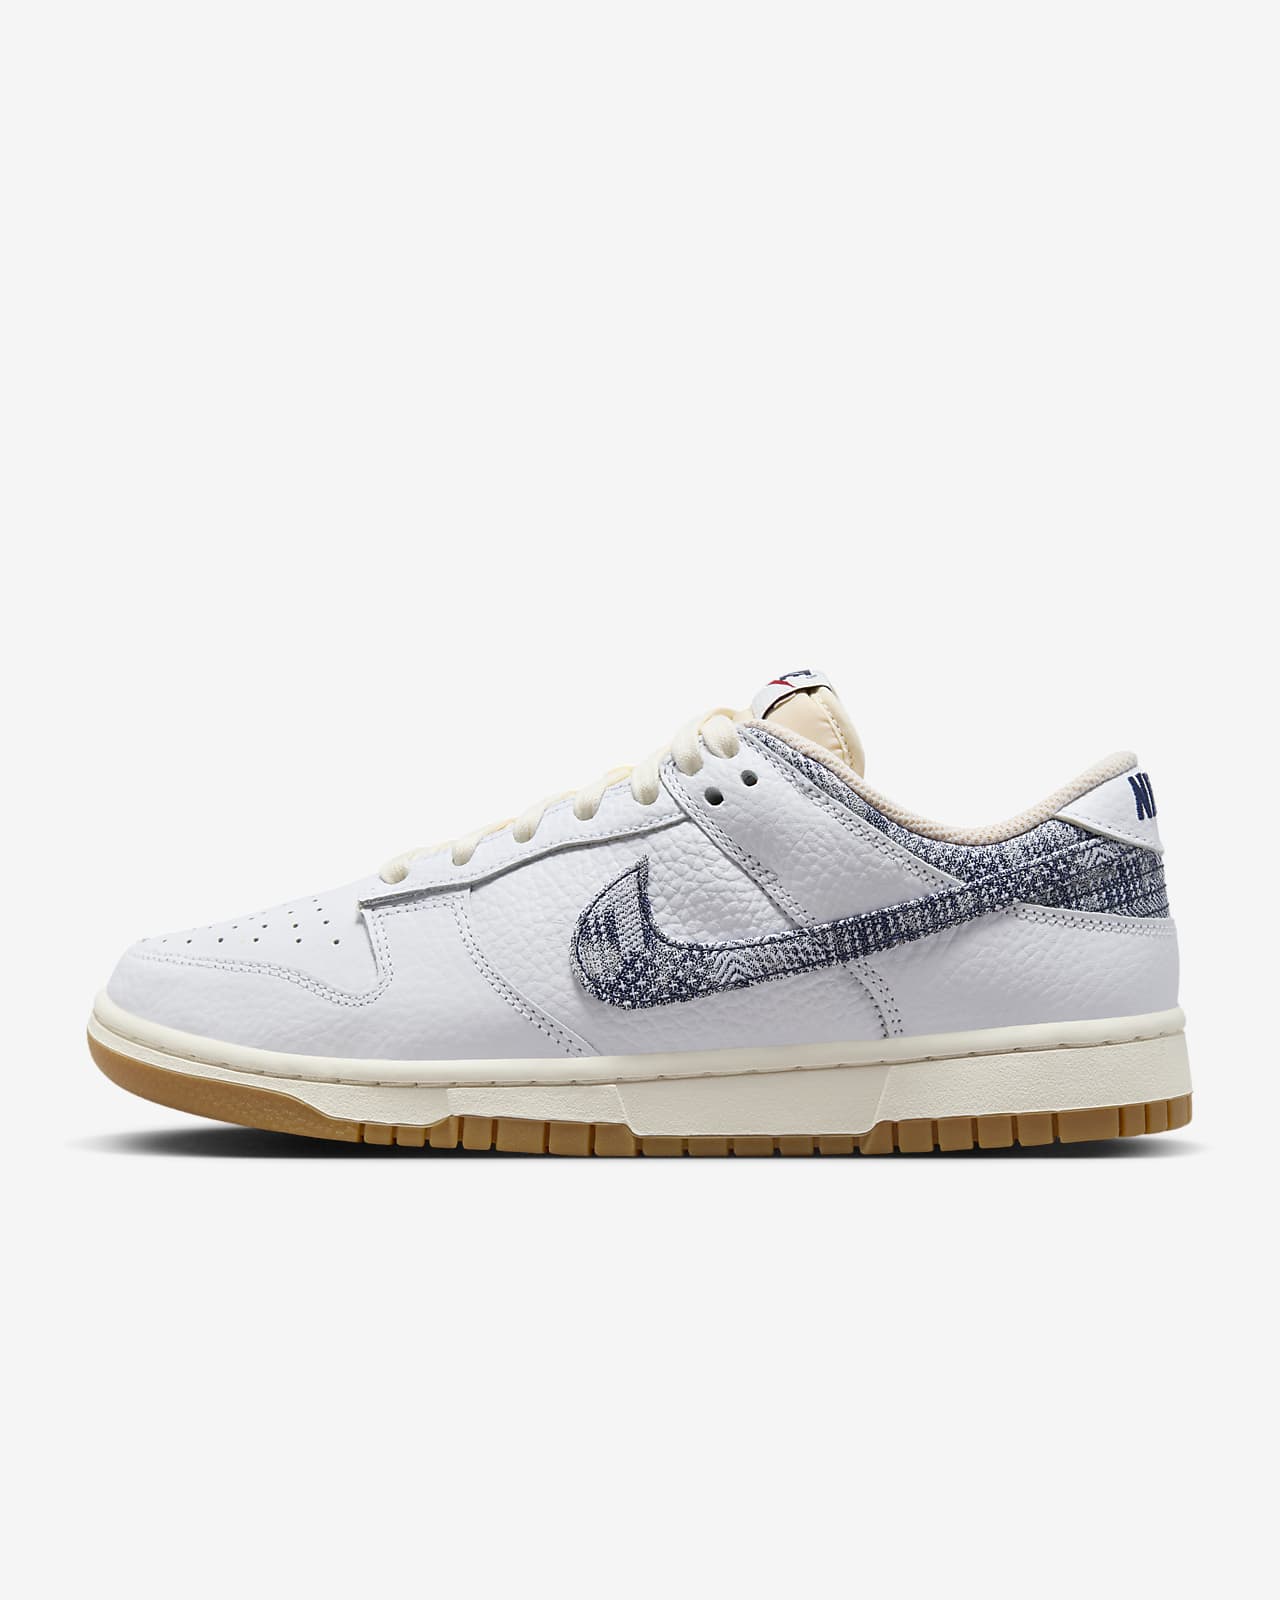 Nike Dunk Low Mens Shoes Review